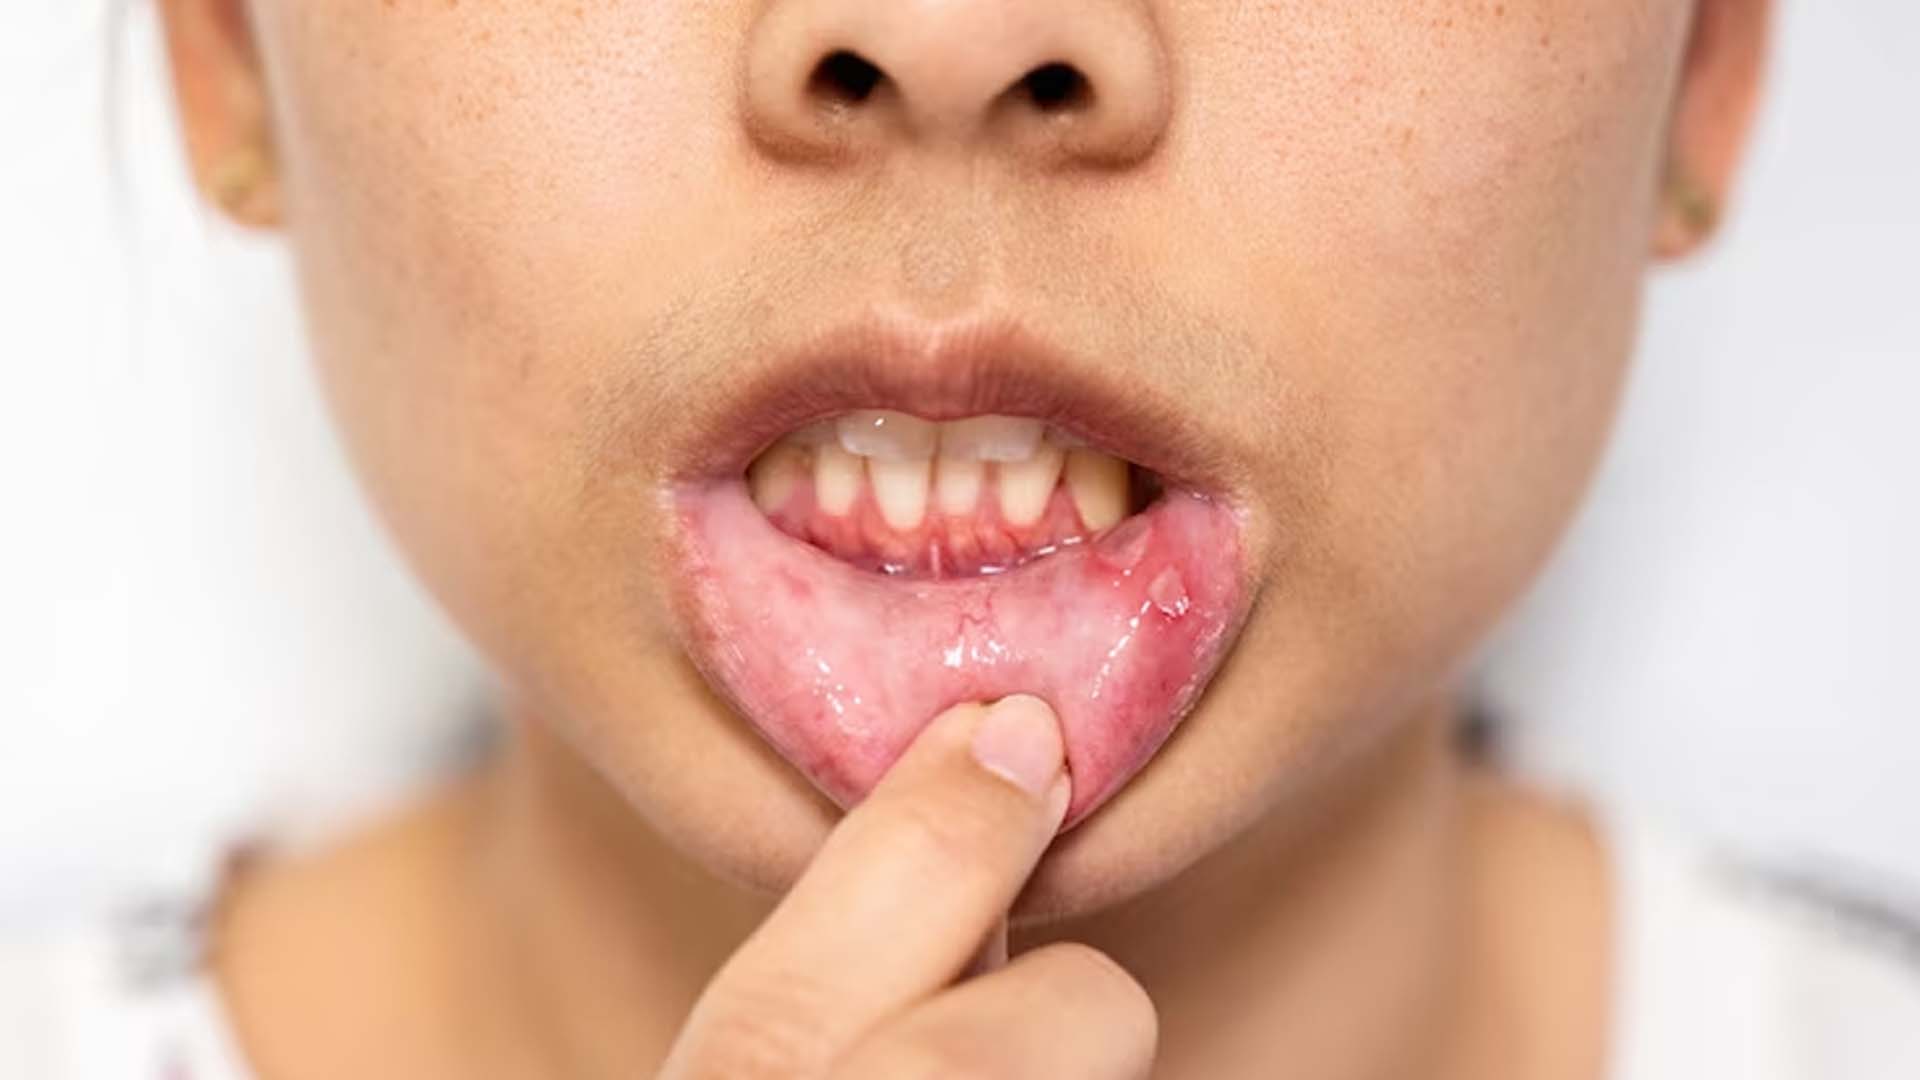 Women Showing Mouth Ulcers